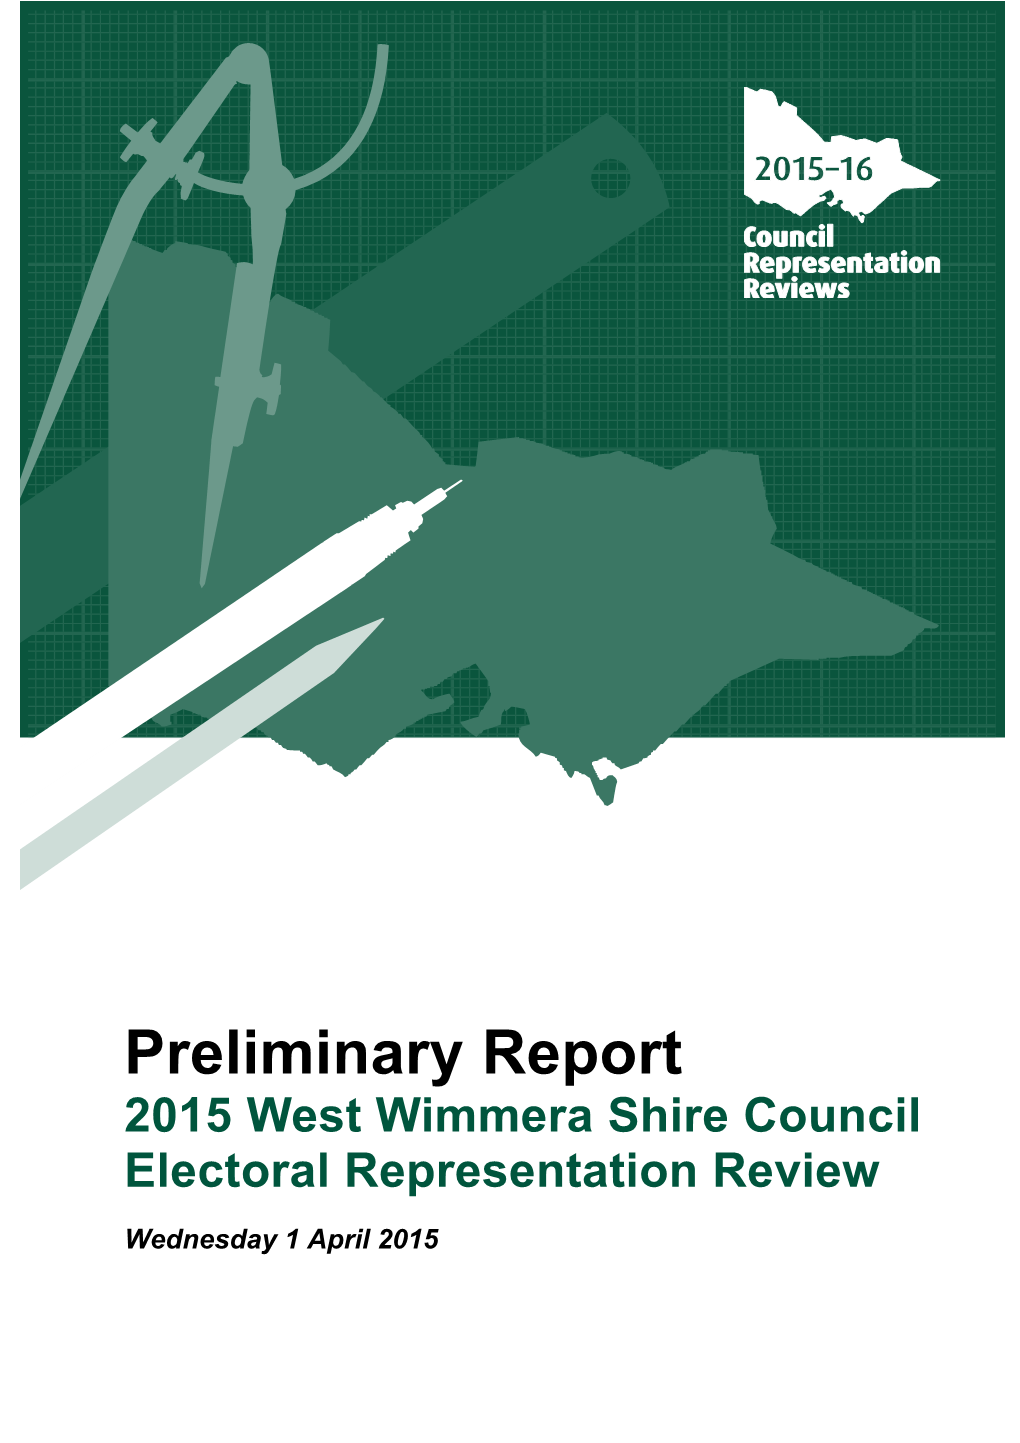 Preliminary Report 2015 West Wimmera Shire Council Electoral Representation Review